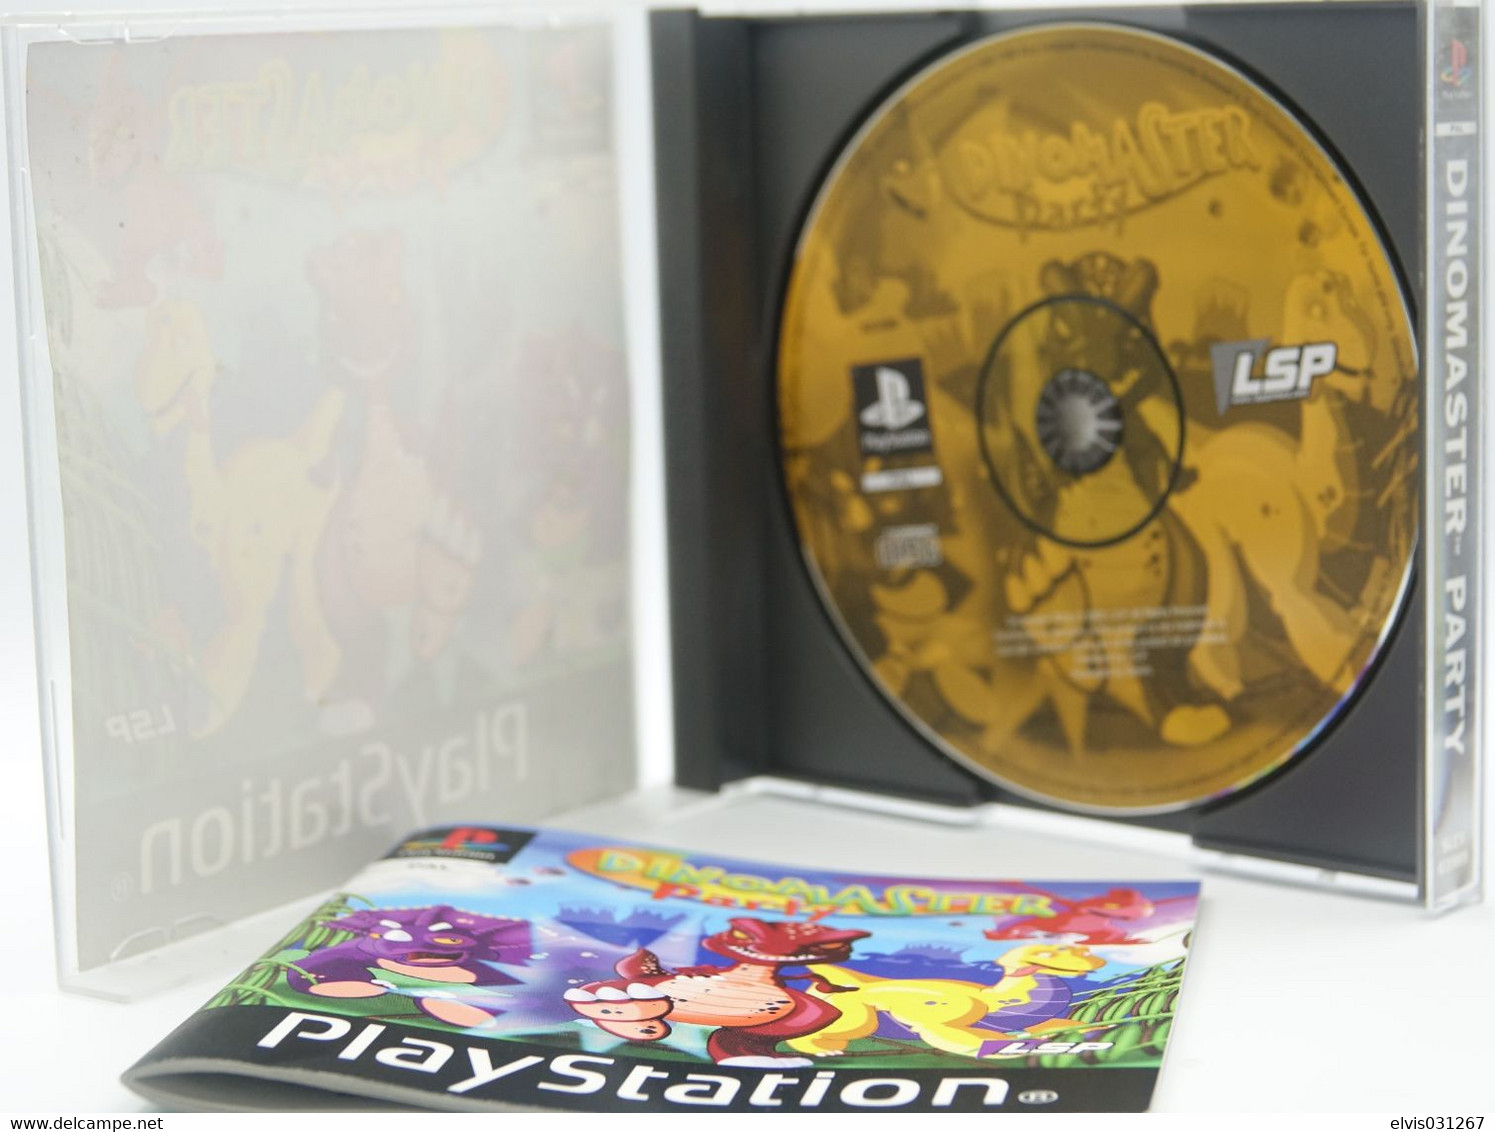 SONY PLAYSTATION ONE PS1 : DINOMASTER PARTY - Playstation